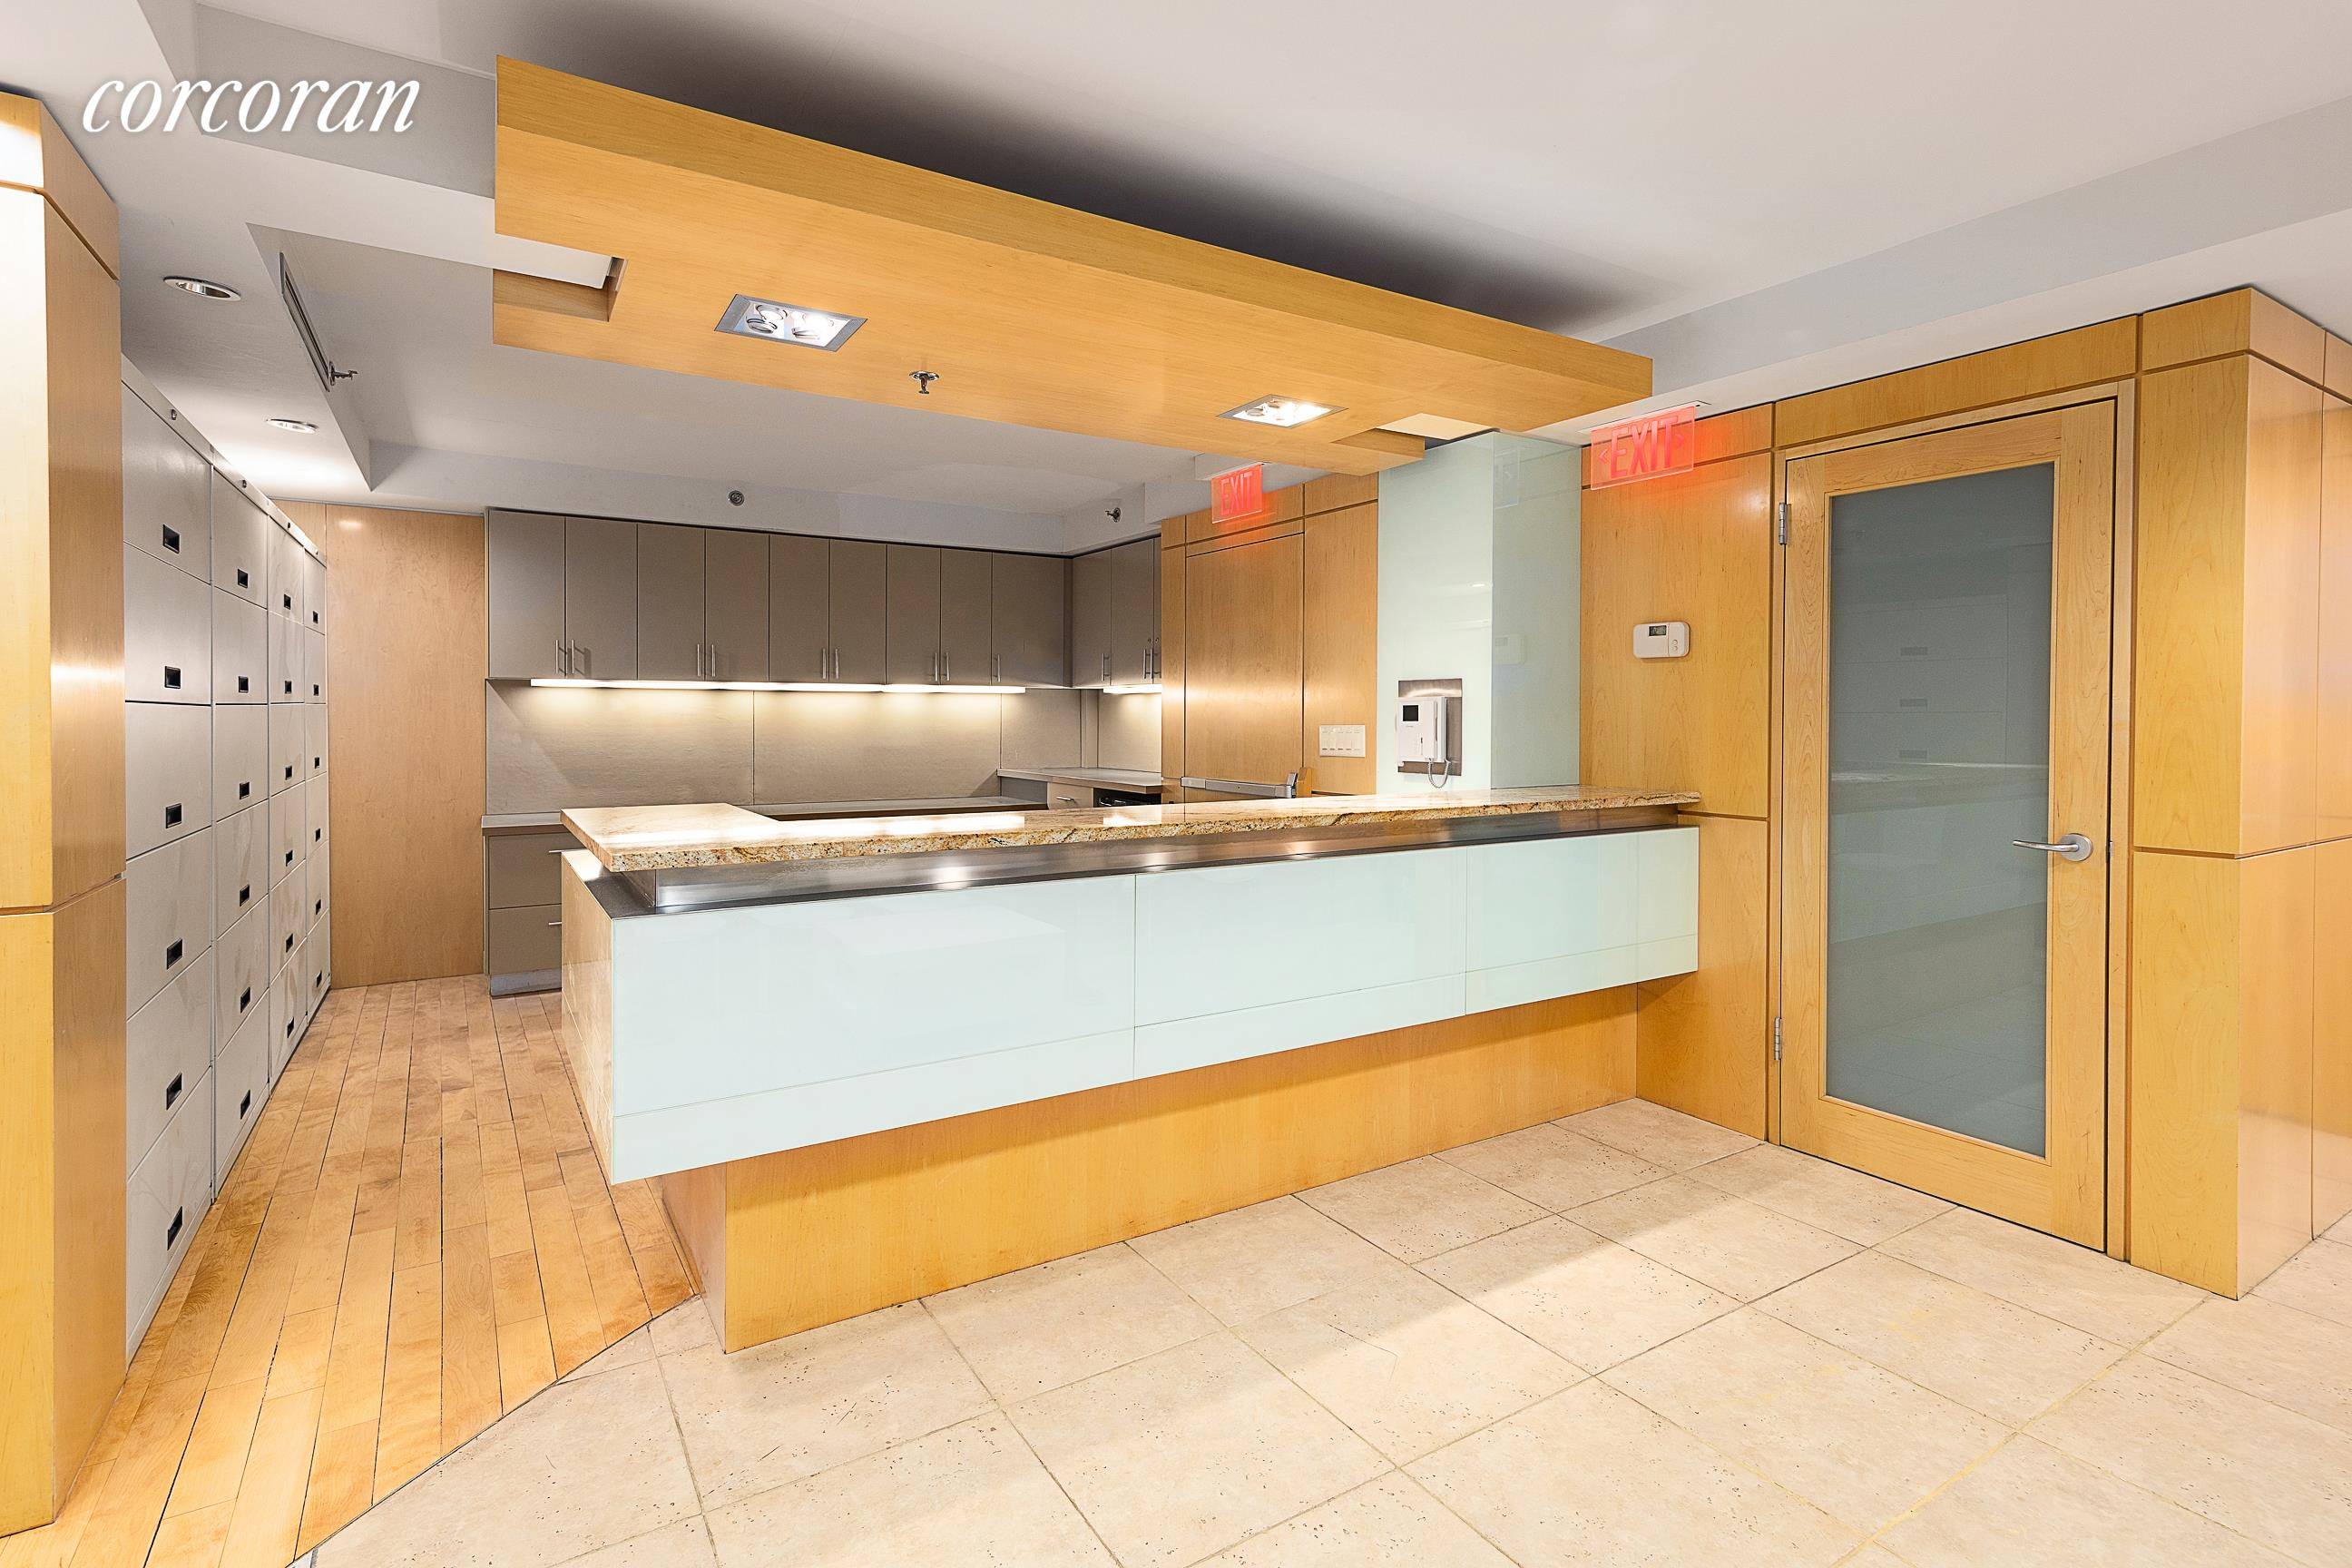 Pristine move in ready Lenox Hill medical office for sale at 205 East 76th Street between Third and Second Avenues at the Lenox Court Condominium.